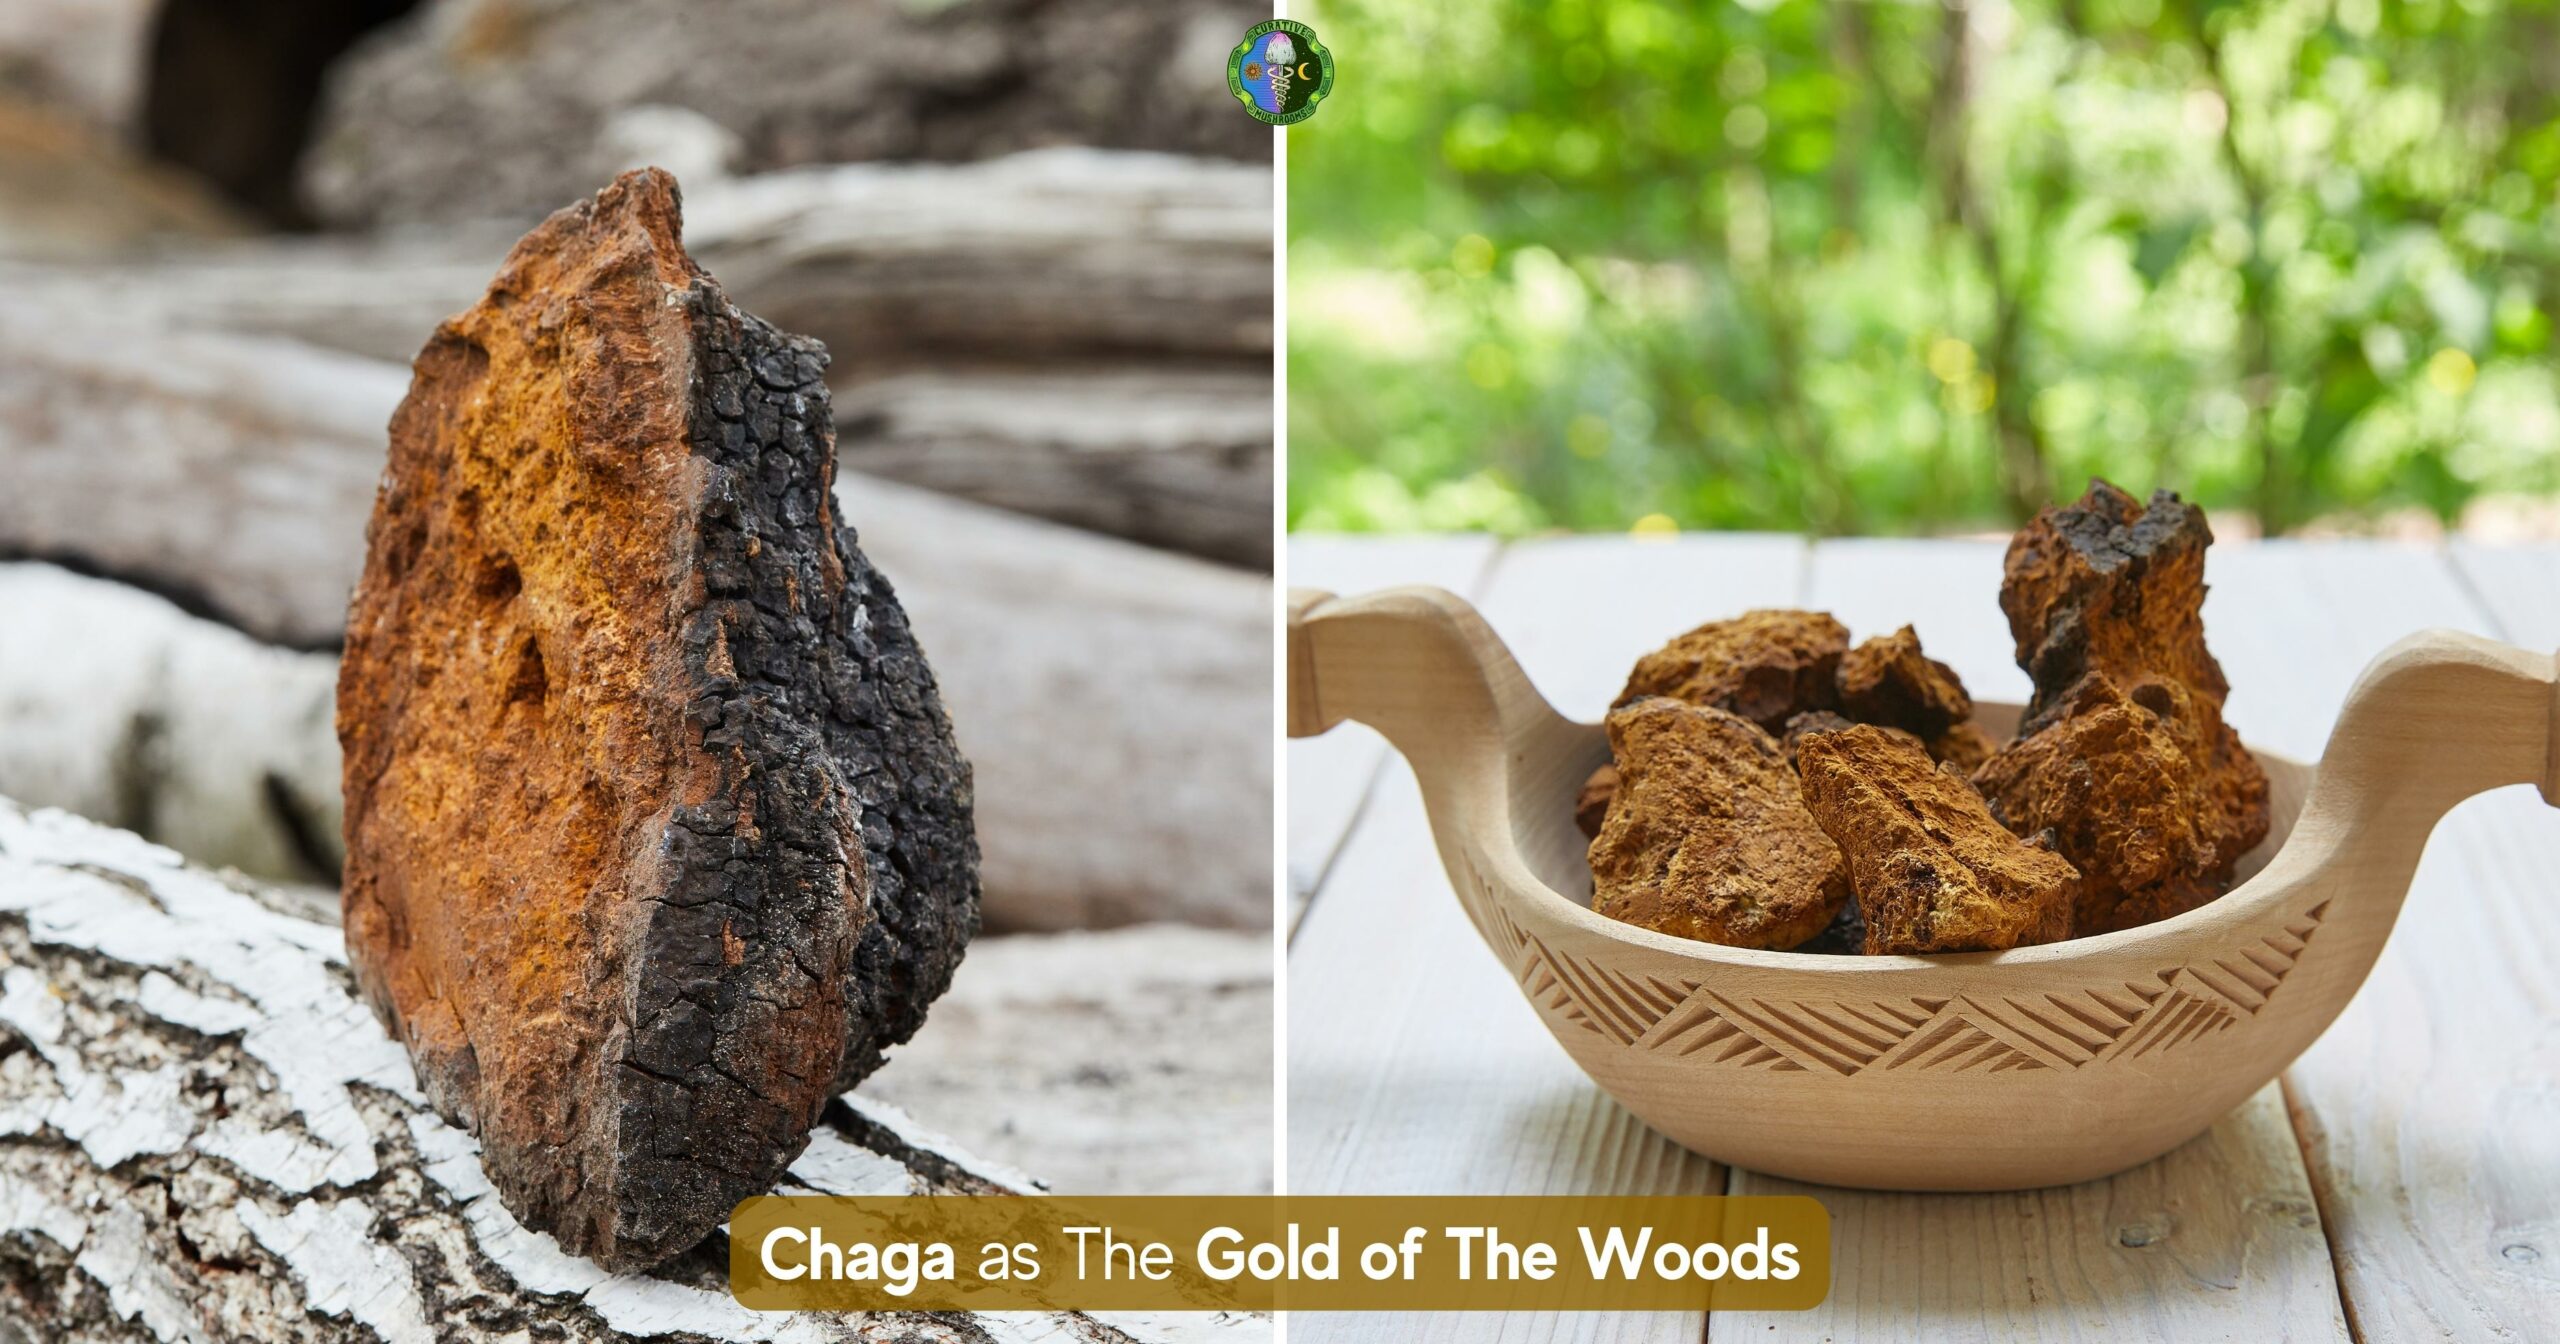 Chaga Gold of the Woods - medicinal valuable as gold - reduce inflammation, fight cancer cells, regulate blood sugar levels, prevent heart disease, boost immune system, fight stress